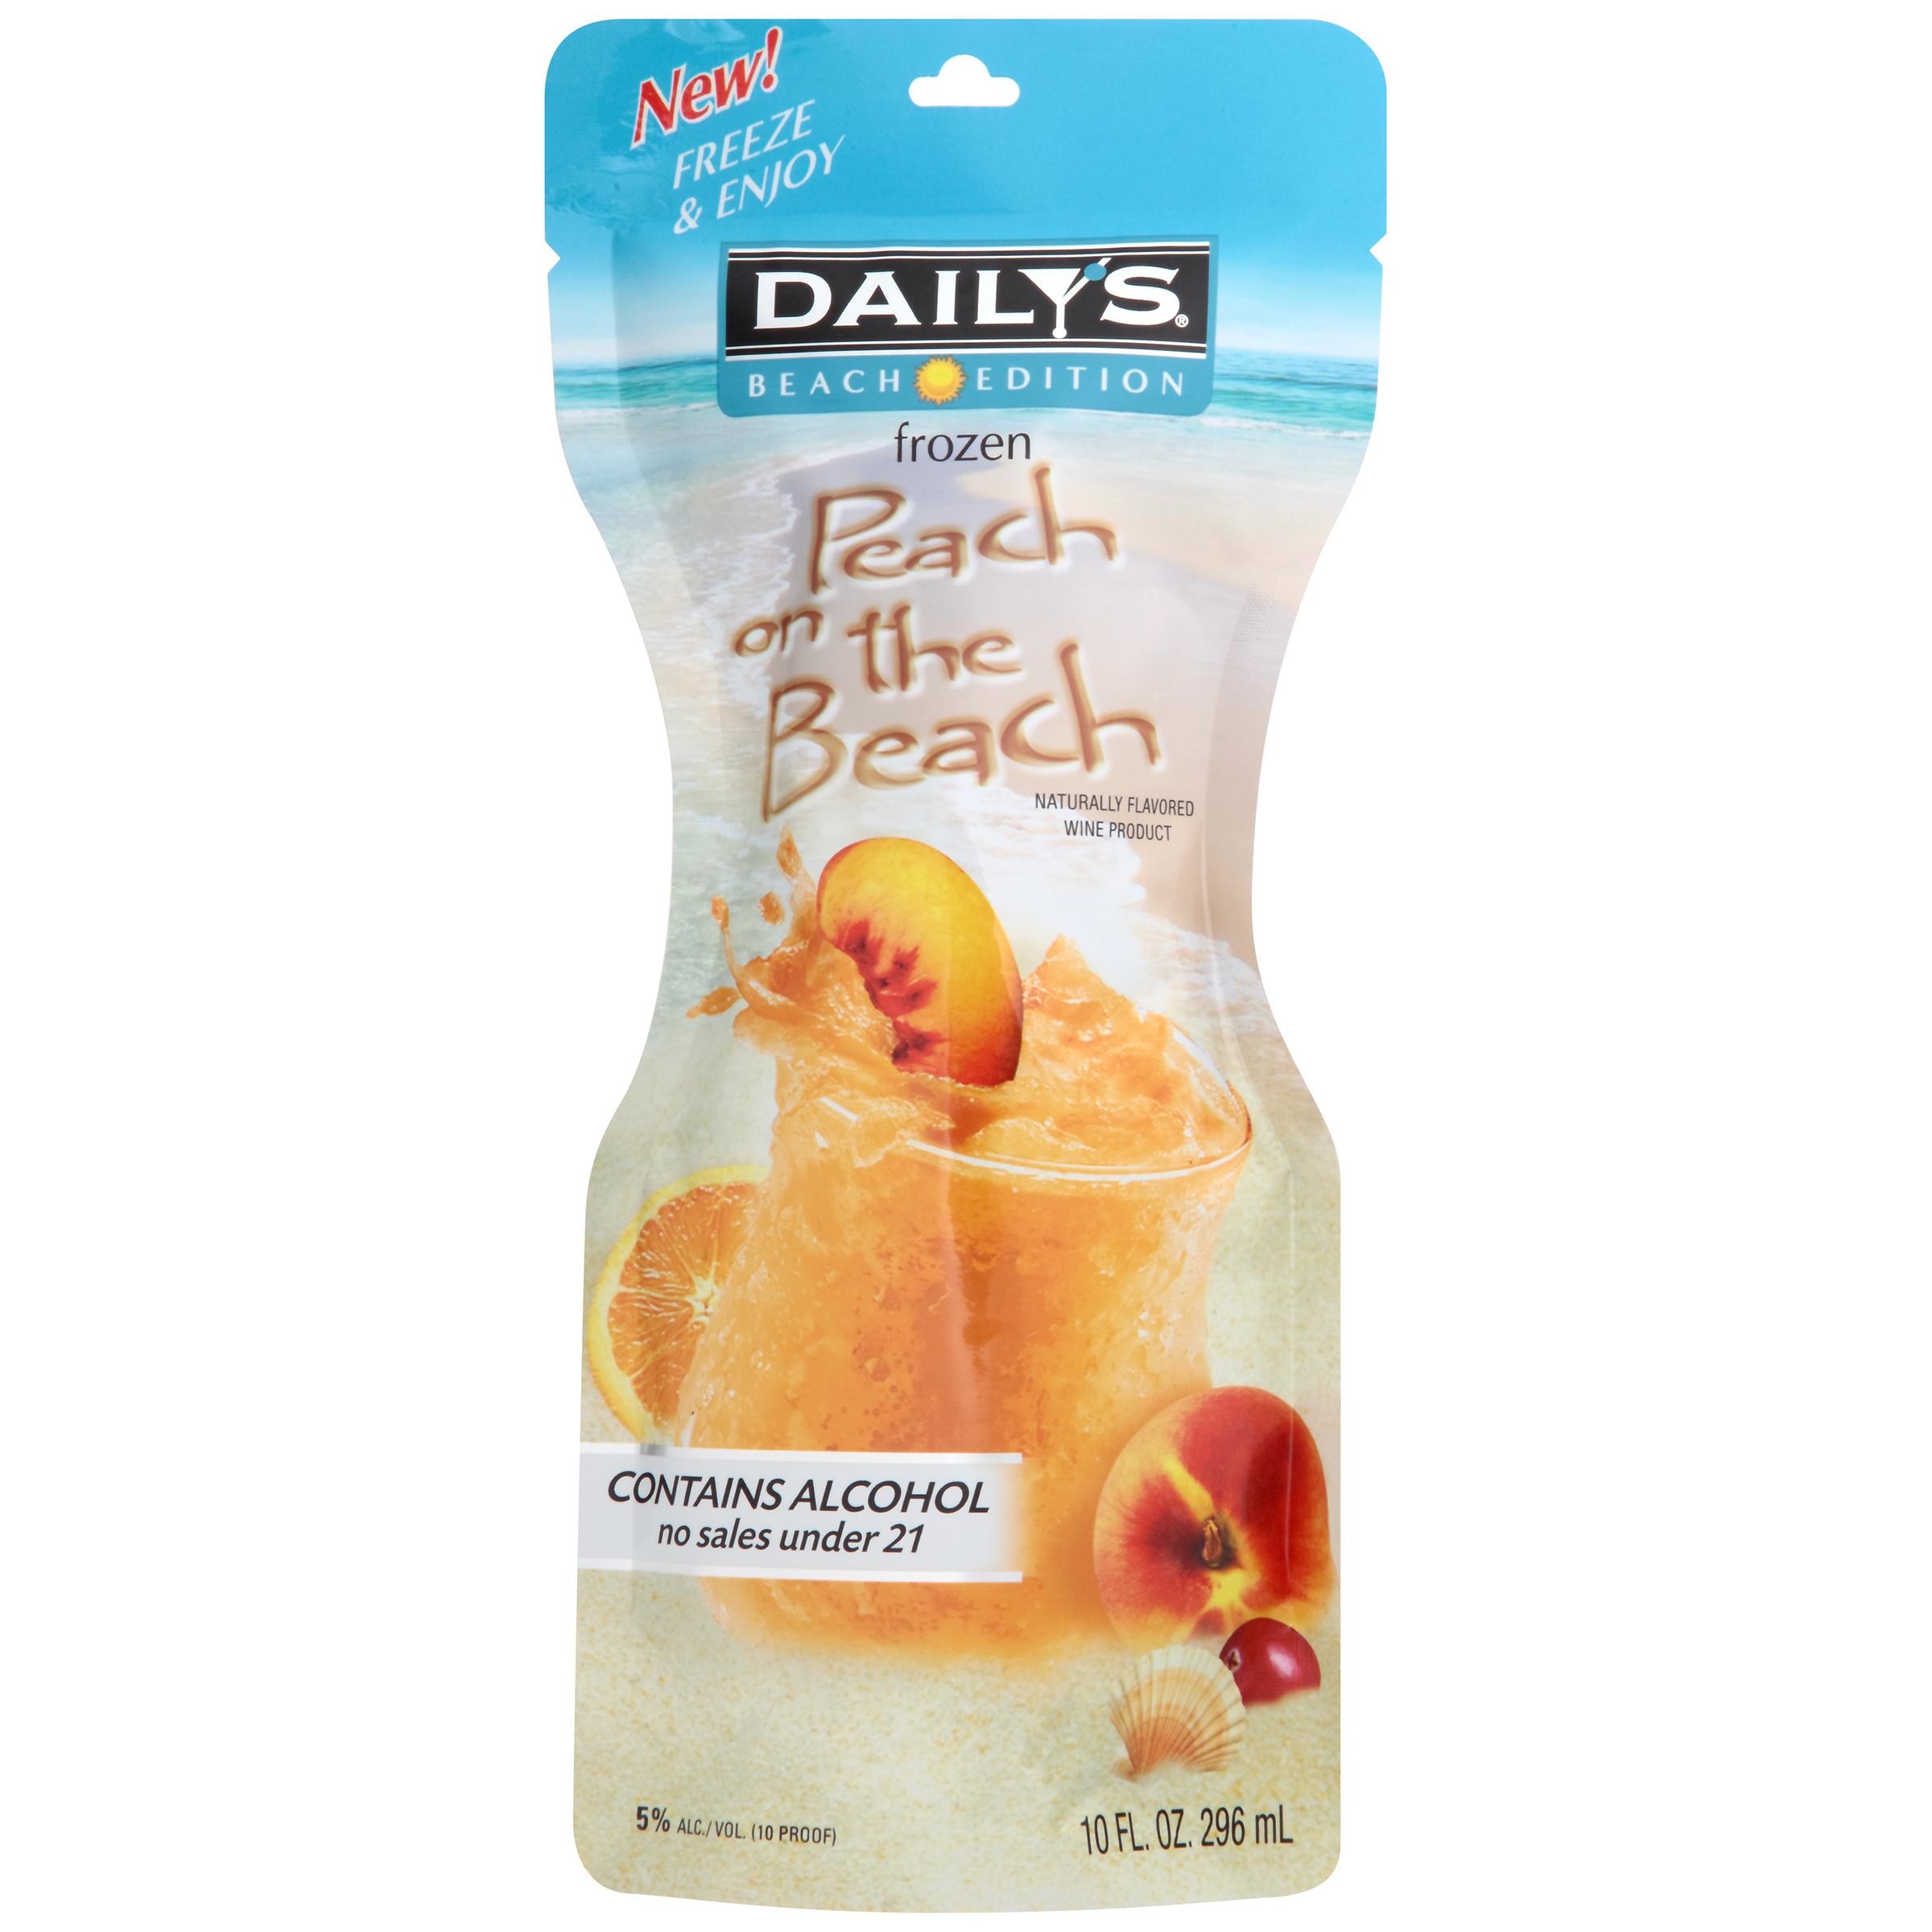 Daily's Peach on the Beach Frozen Pouch 10oz